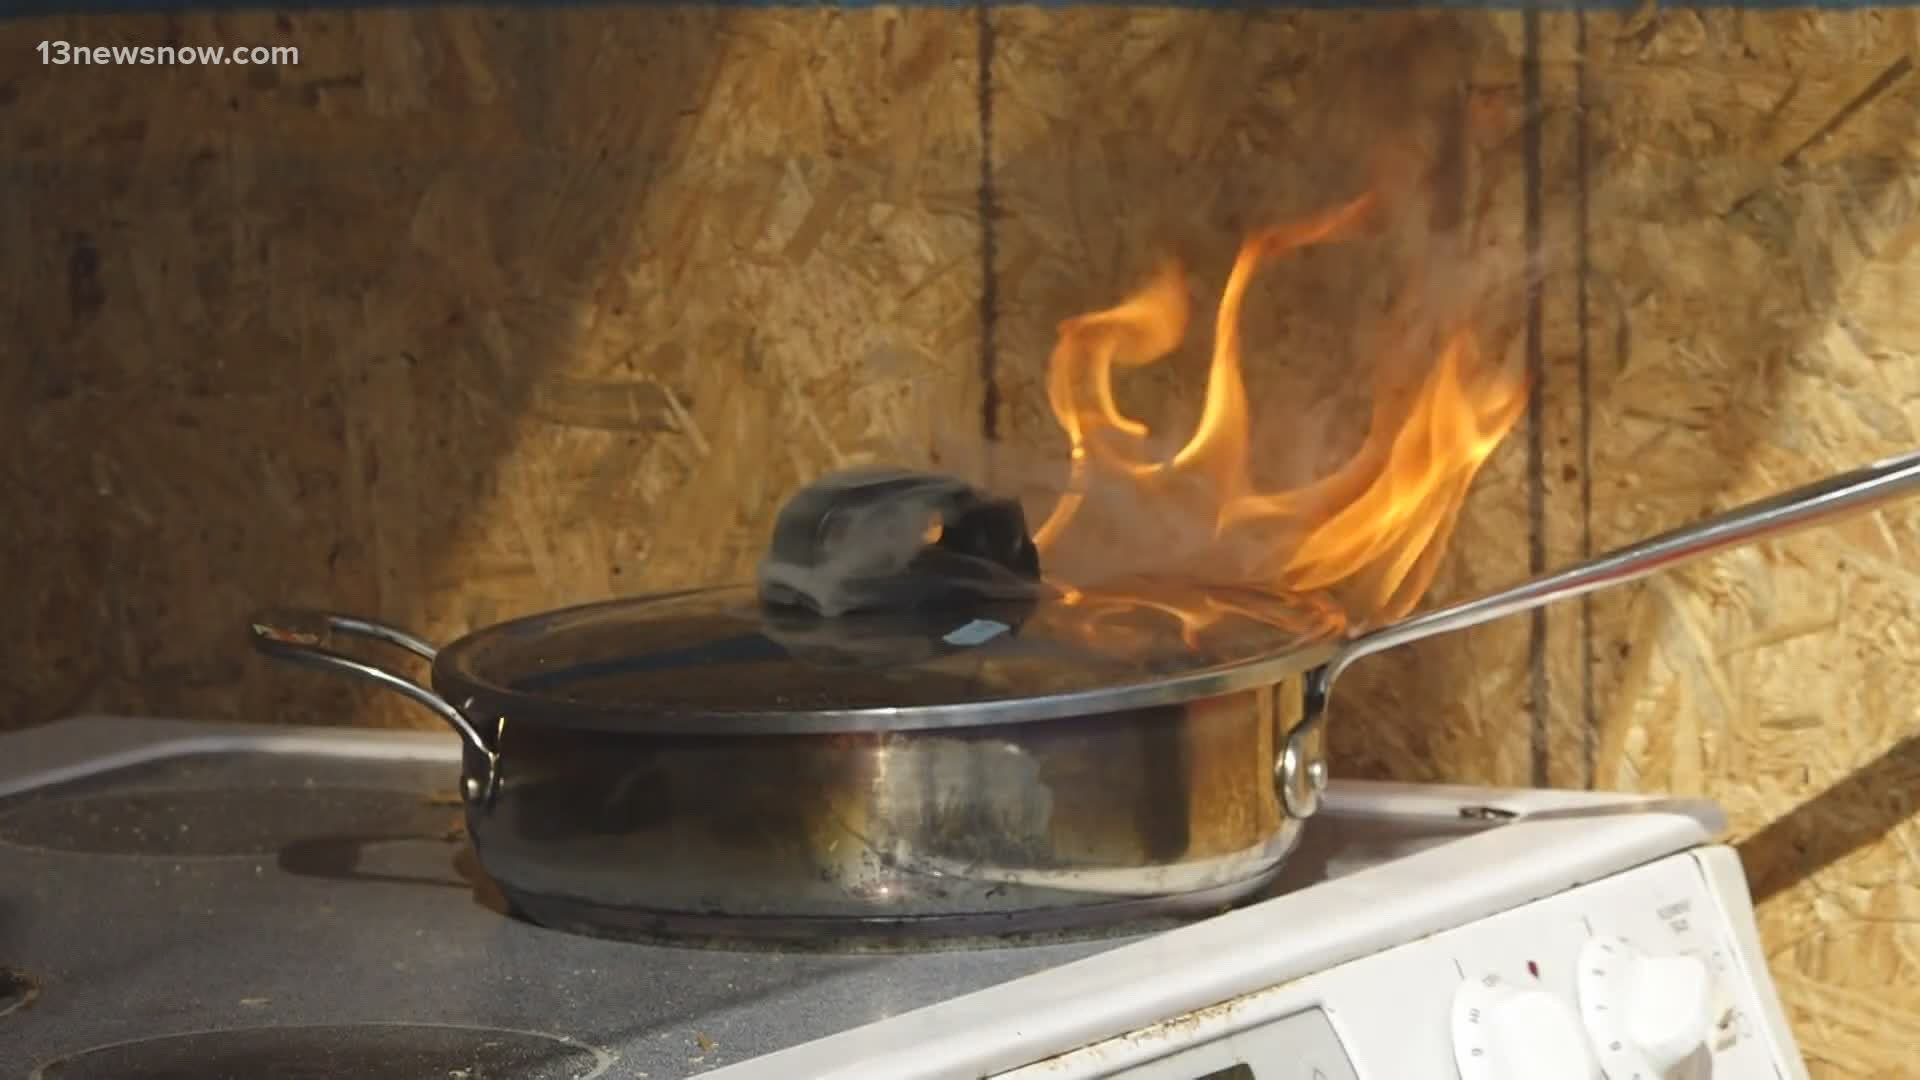 "Unattended cooking is the leading cause for residential fires, and the second leading cause for home fire injuries." Never throw water on a grease fire.